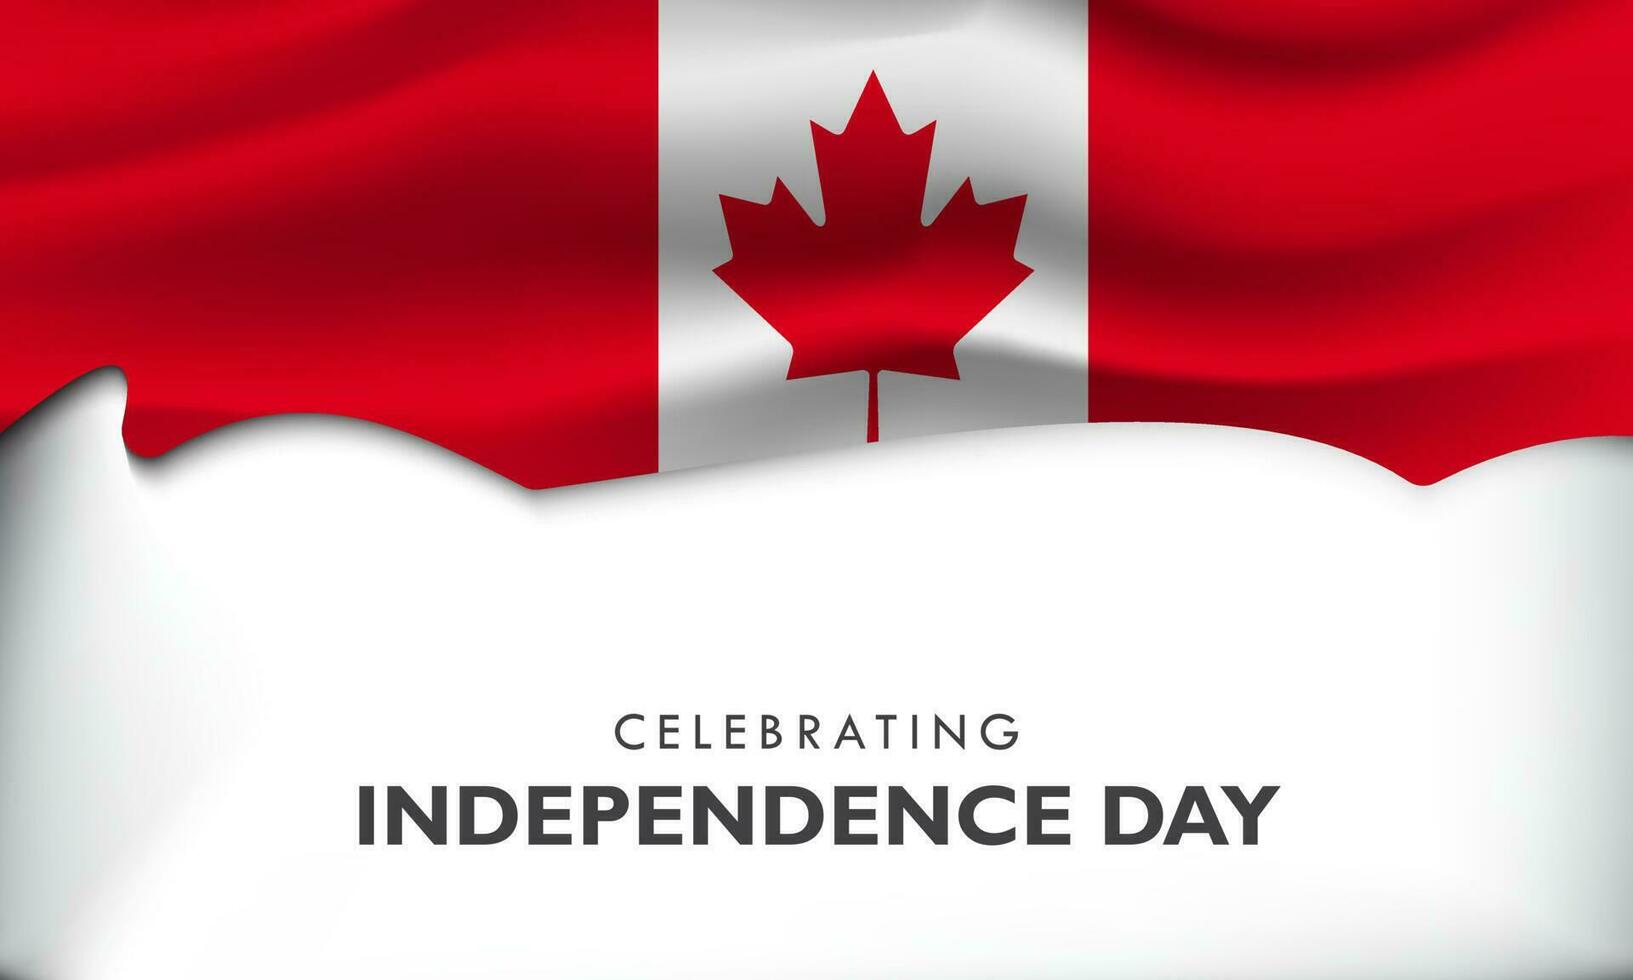 Celebrating canada independence day, Canada Abstract flag and Plain background vector